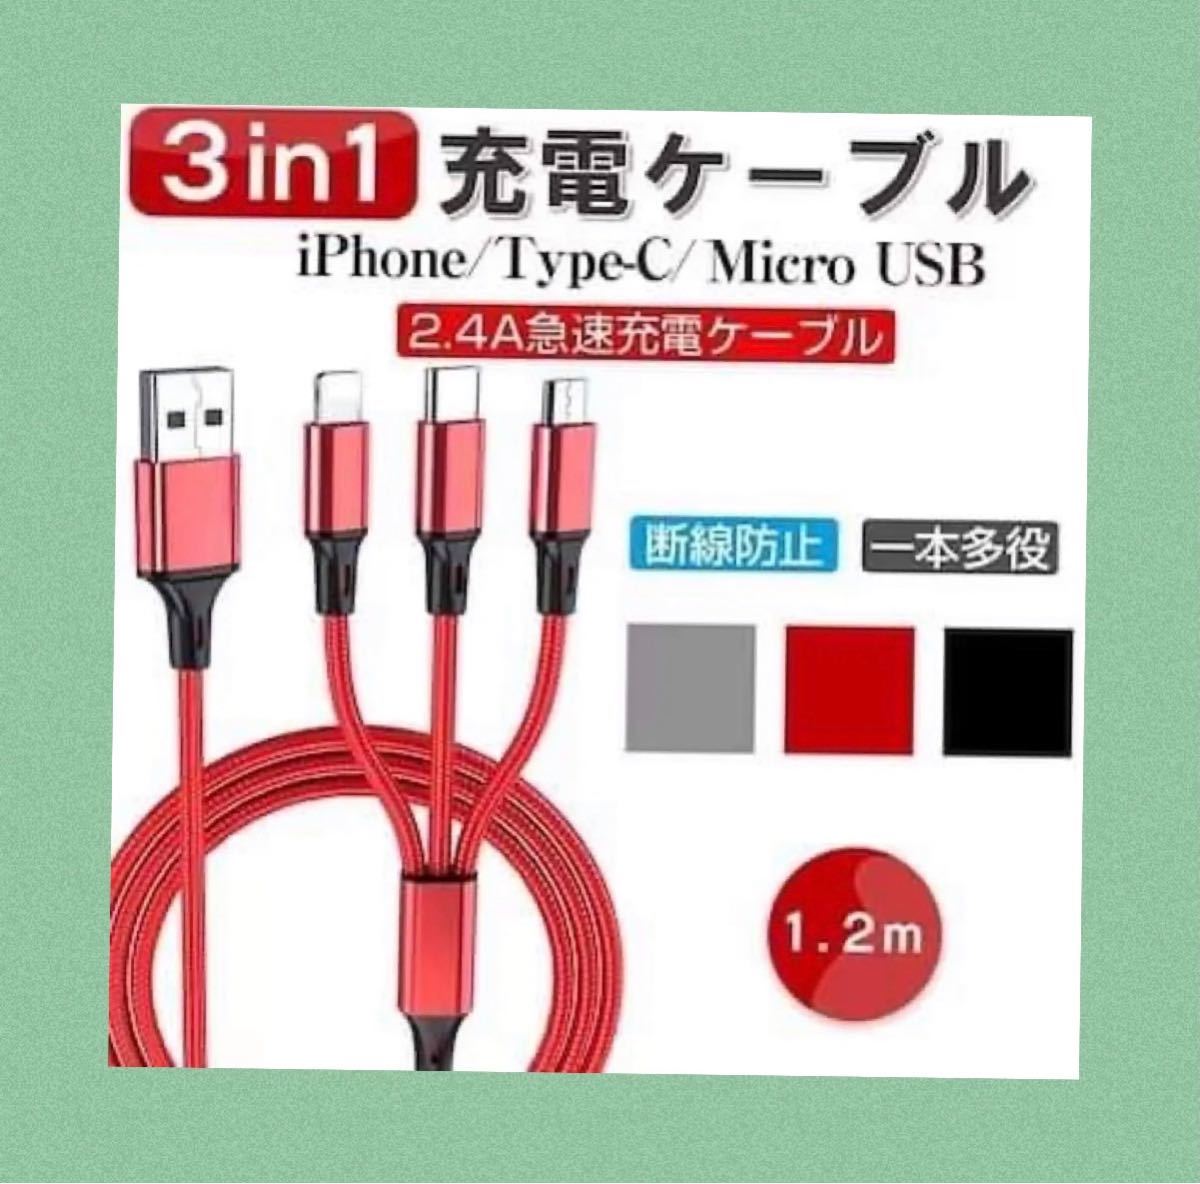 PayPayフリマ｜新品iPhone Android micro USB Type-C 3in1充電